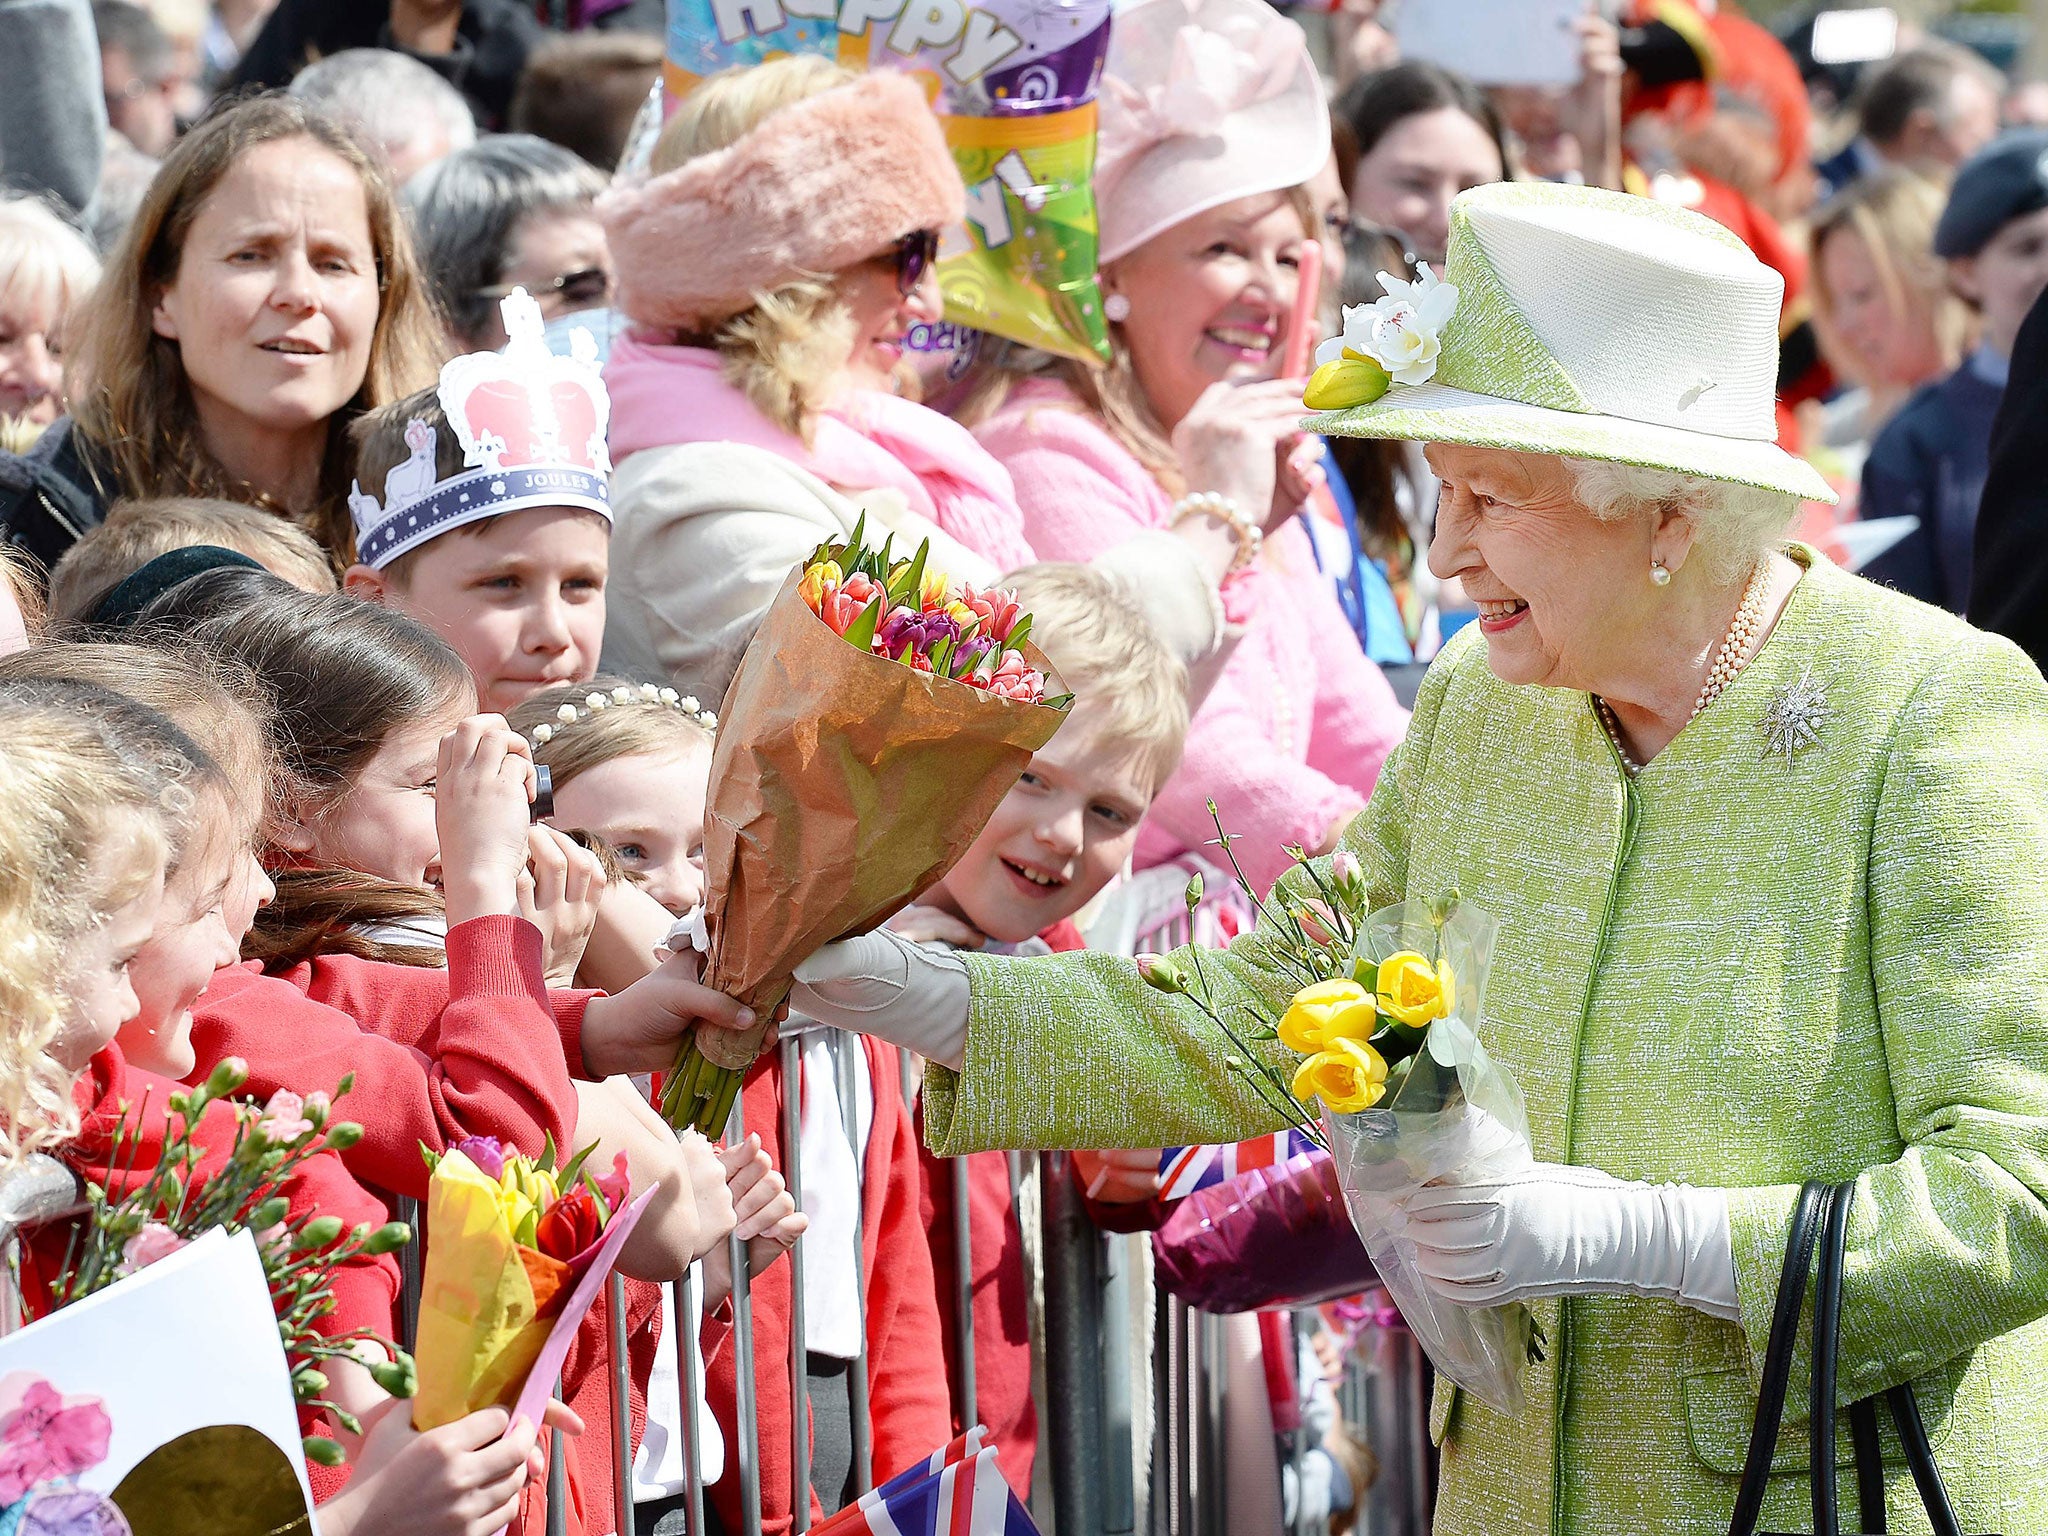 The Queen greets well-wishers during a 'walkabout' on her 90th birthday in Windsor (AFP/Getty)